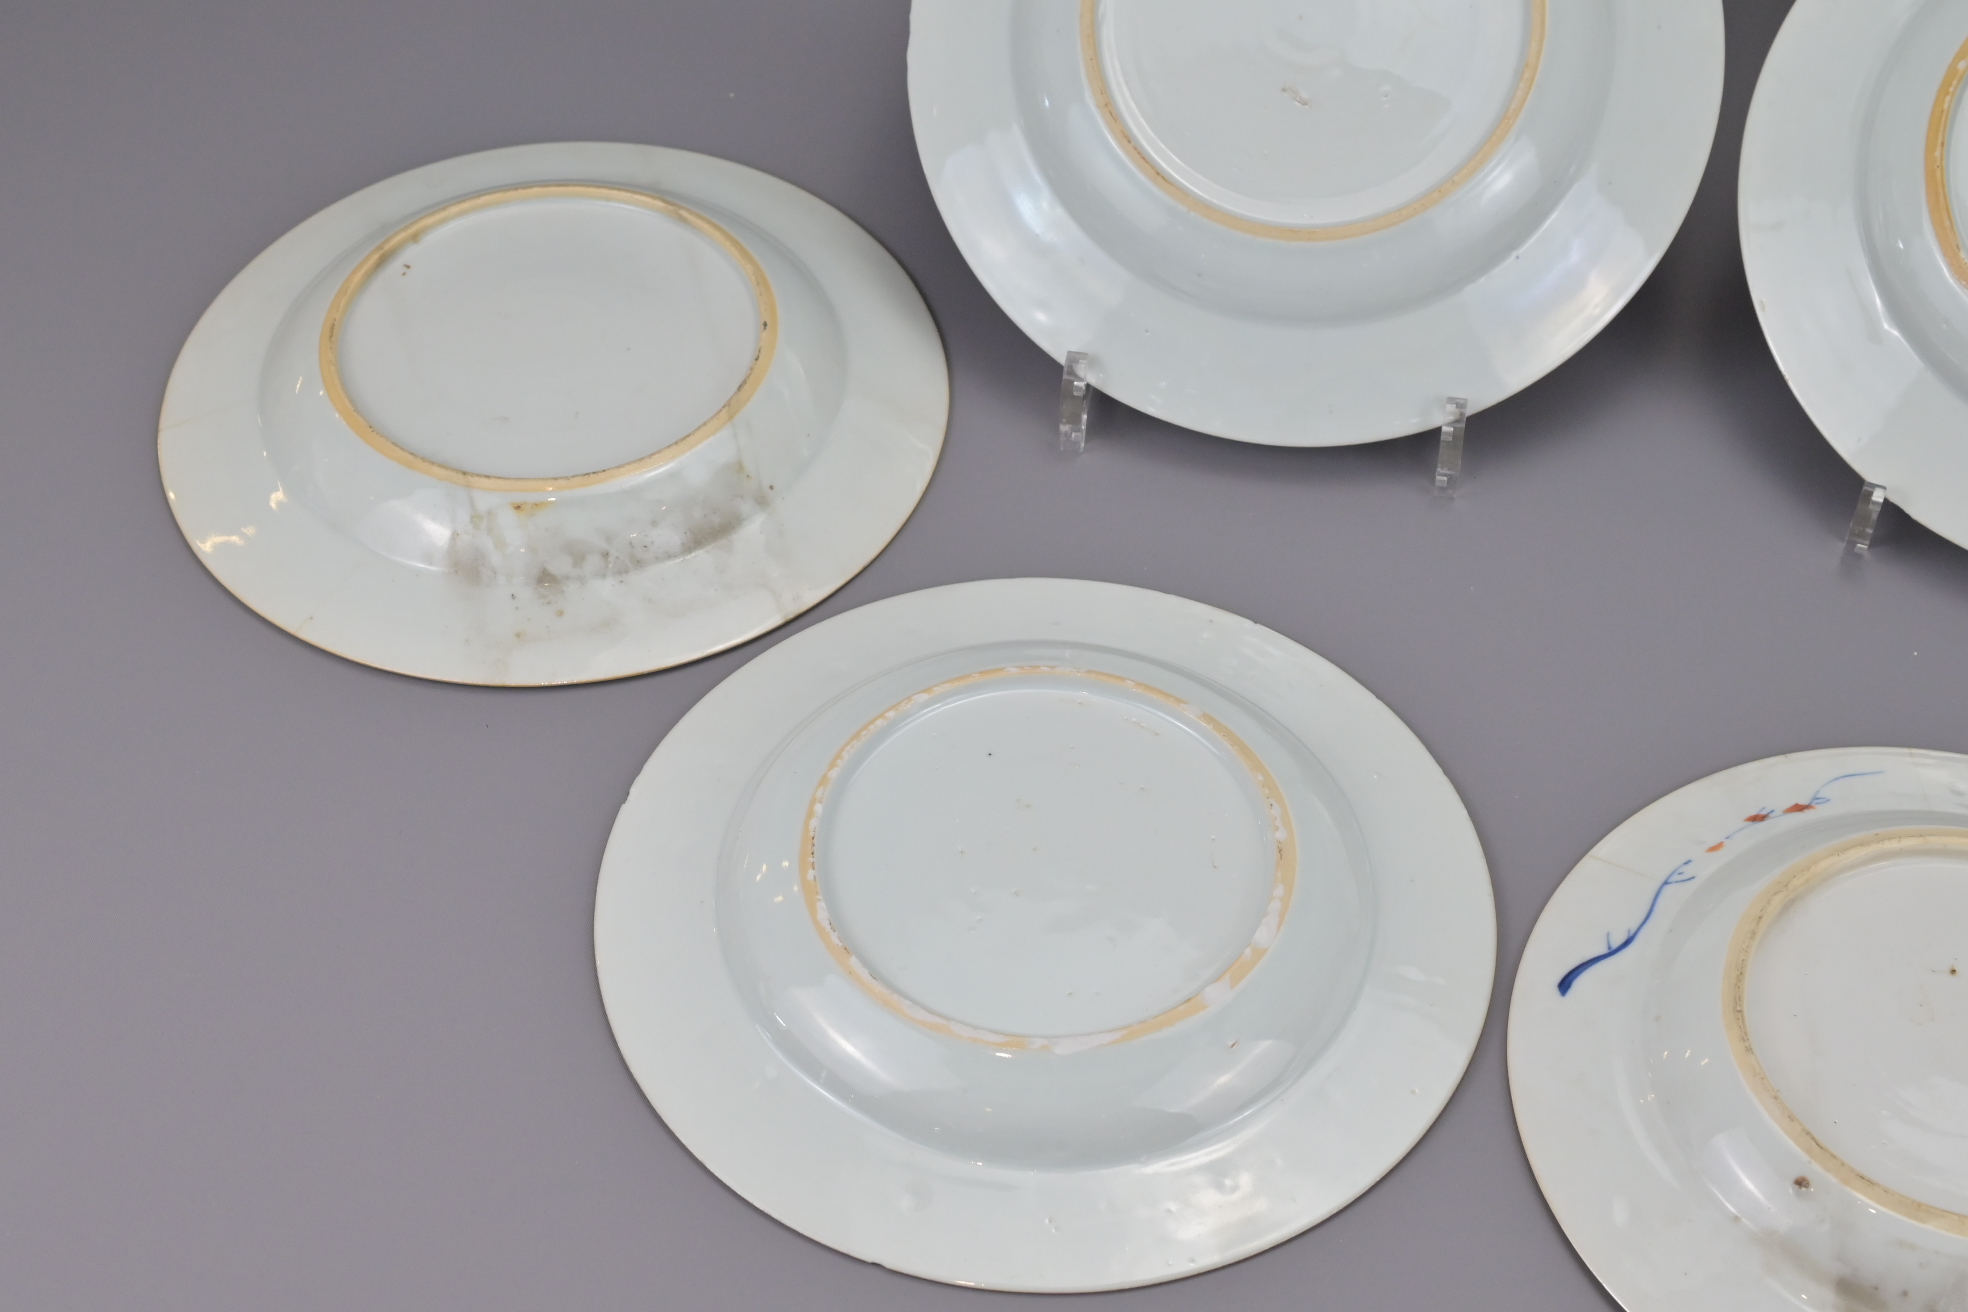 SIX CHINESE FAMILLE ROSE EXPORT PORCELAIN PLATES - Image 6 of 7